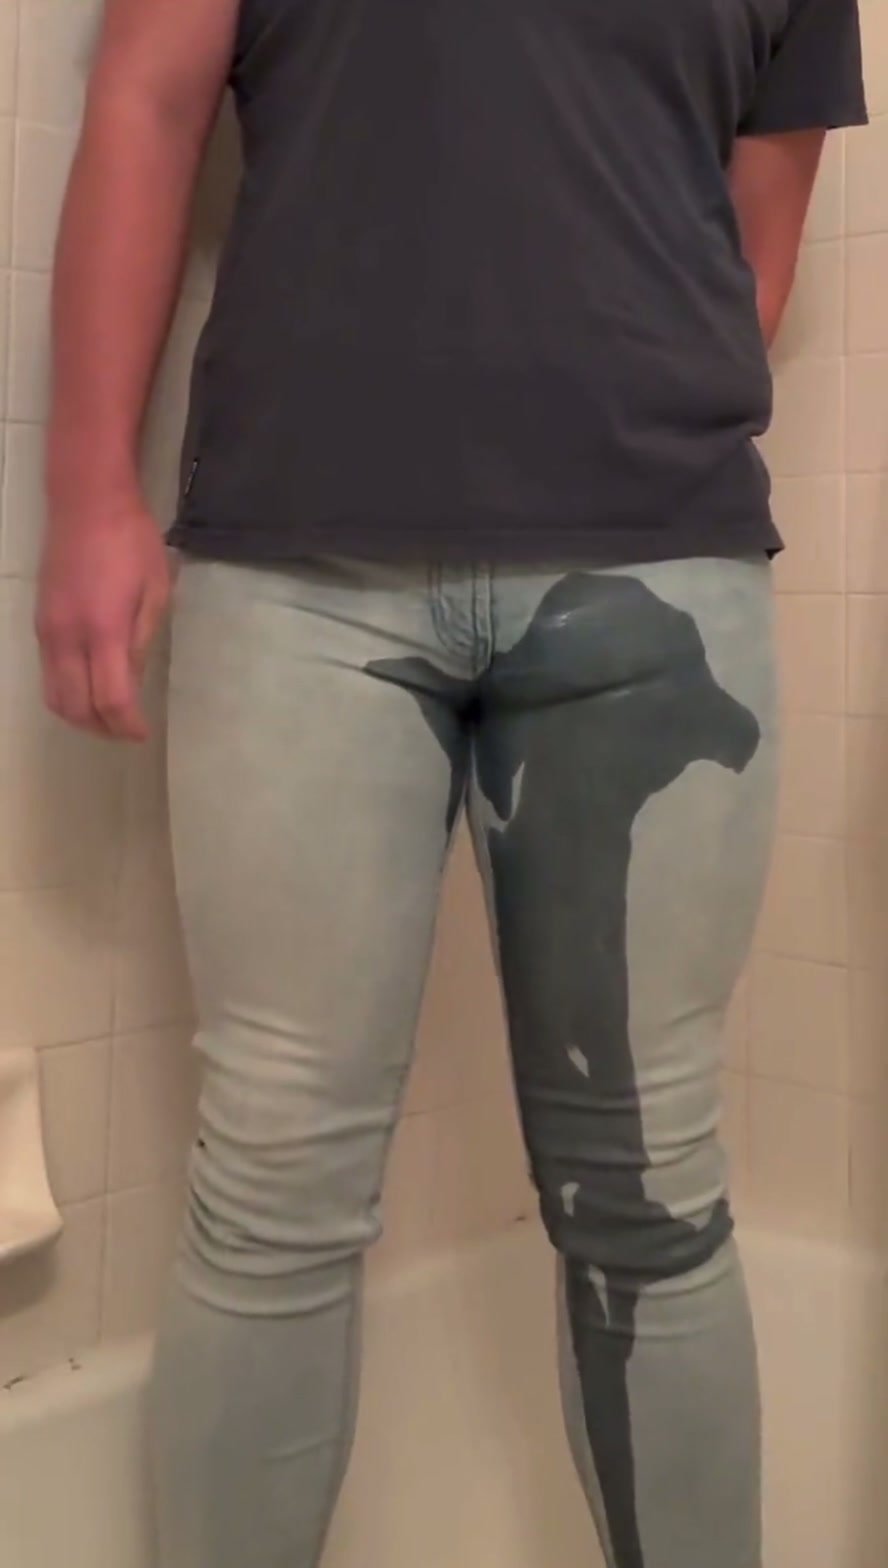 Piss in tight pants